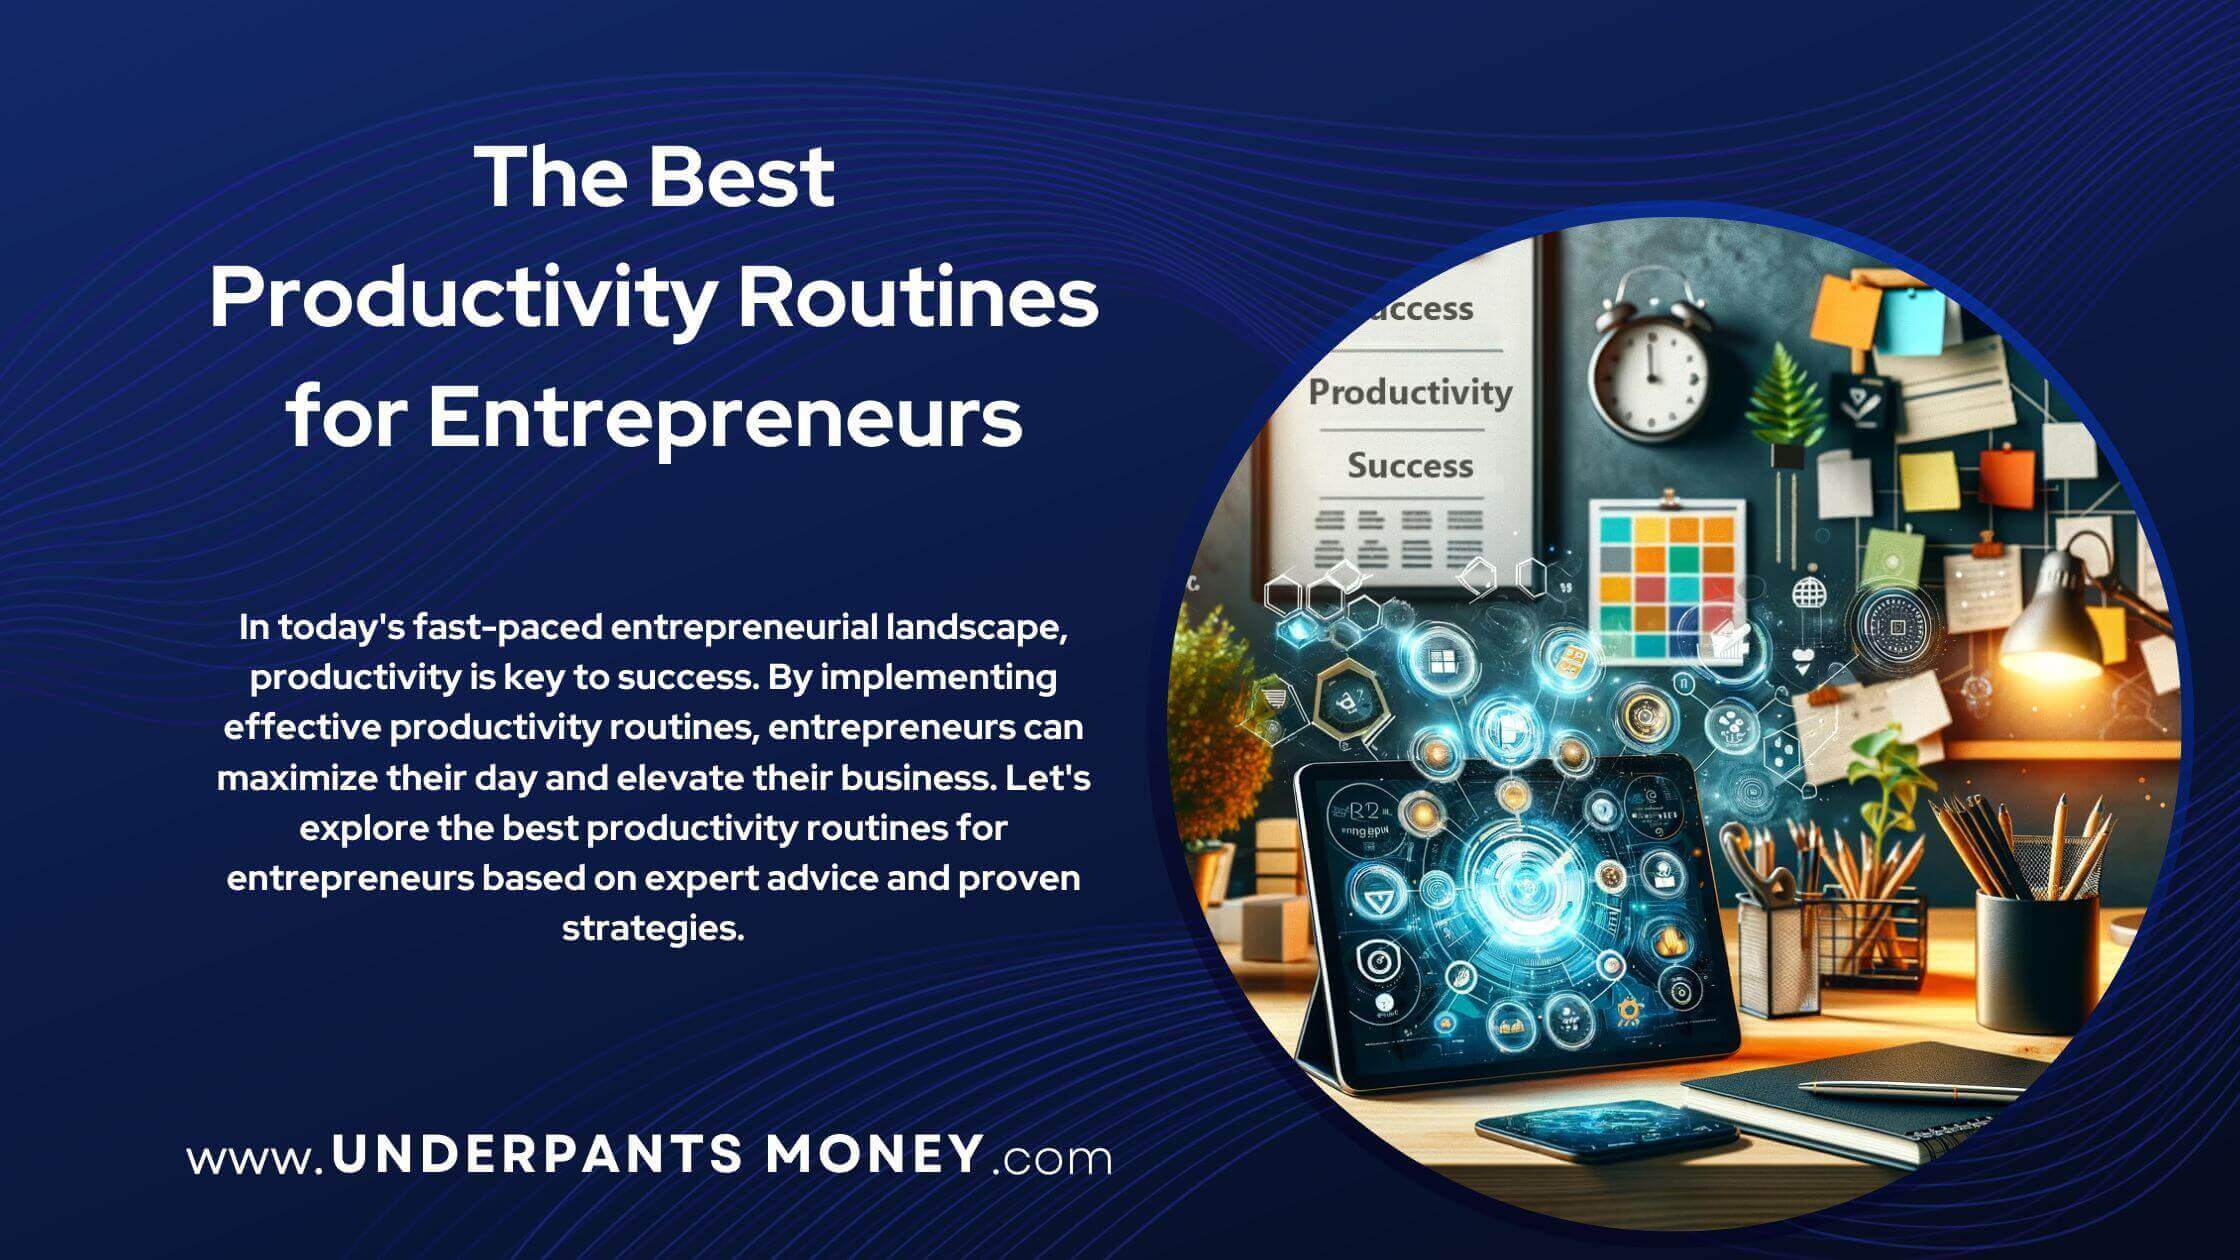 The Best productivity routines for entrepreneurs title and description on blue with image of productive office on the right